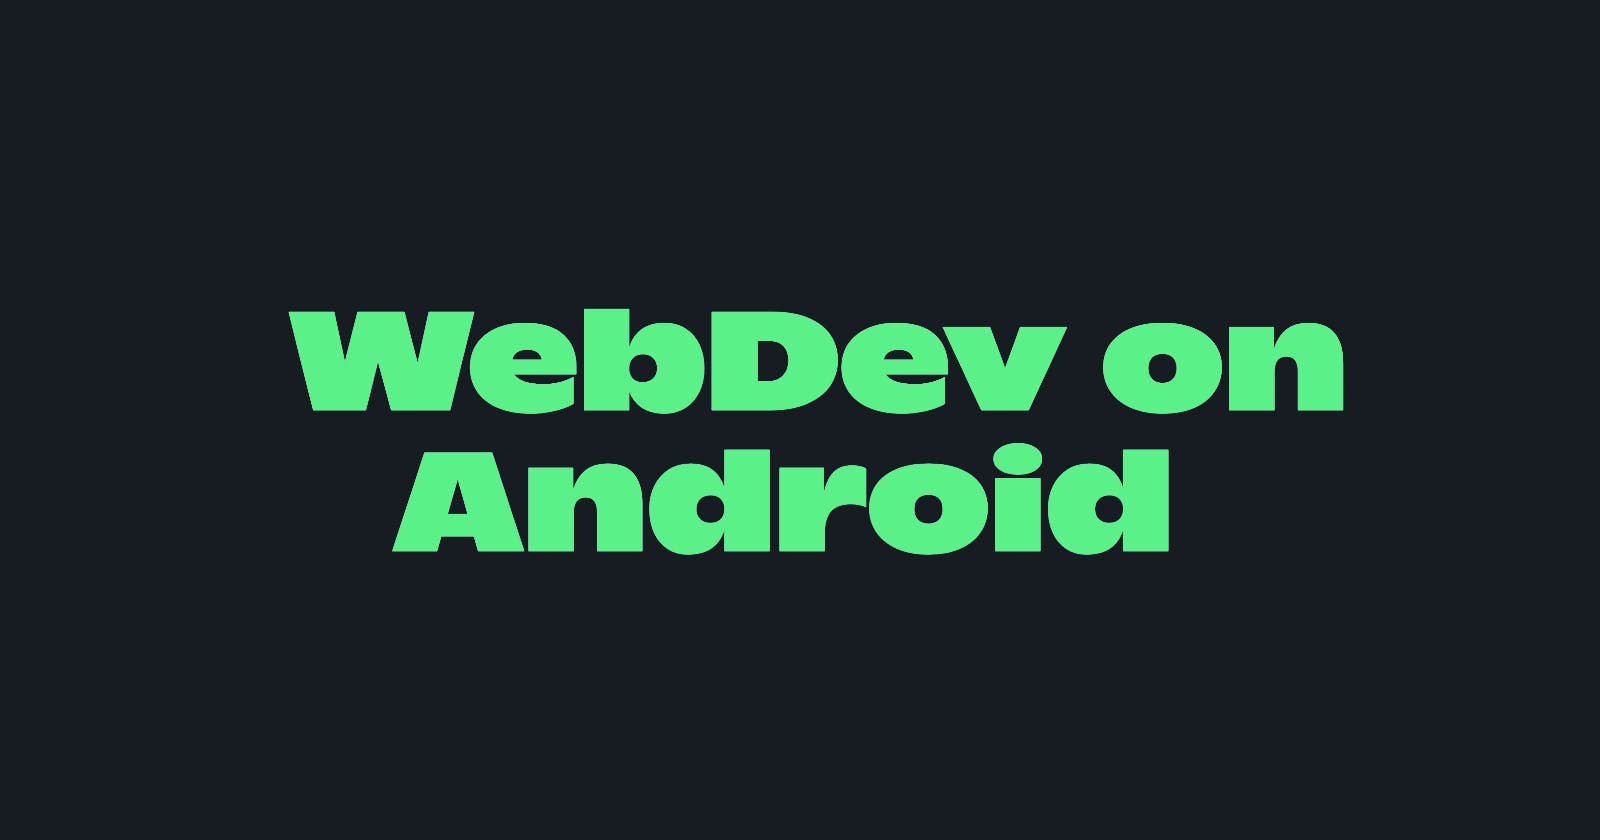 Web Development on android!